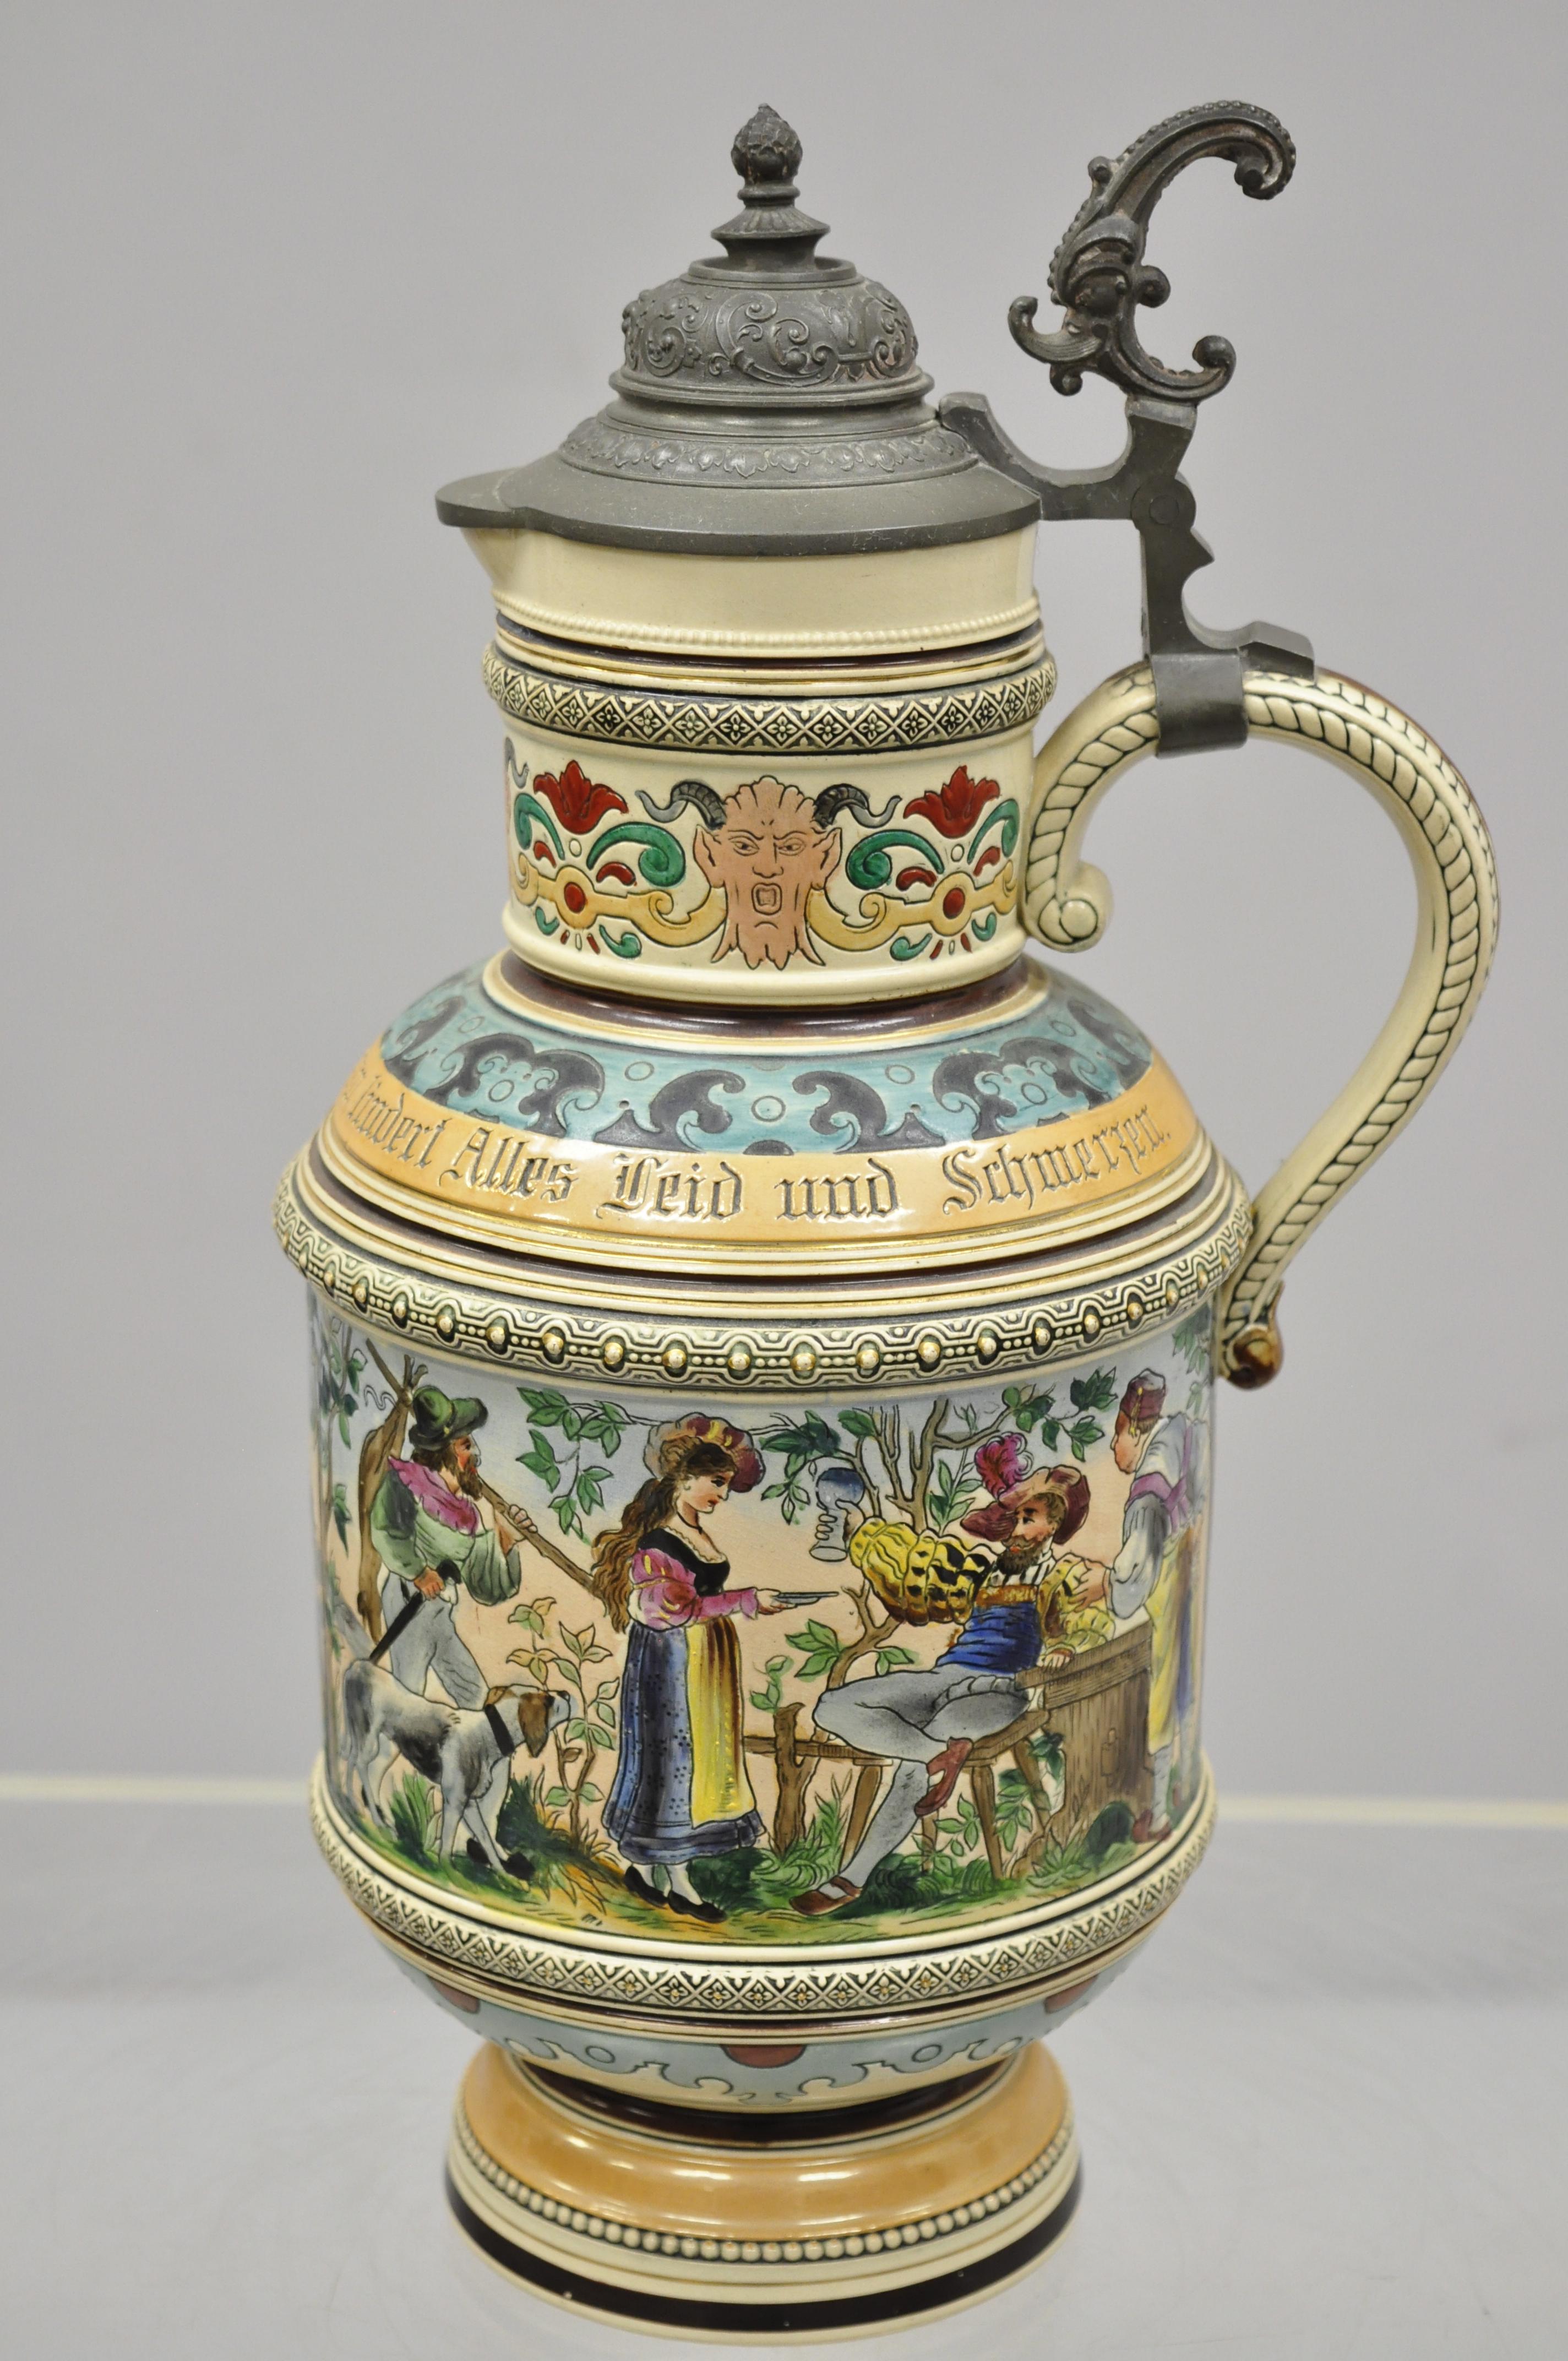 Antique German lidded beer stein 7 piece set by Marzi and Remy #979 Cavalier. Set includes (6) pewter lidded. 4L beer steins, (1) large lidded pitcher, finely decorated scenes of a jovial Cavalier being served. Set has been made in the 